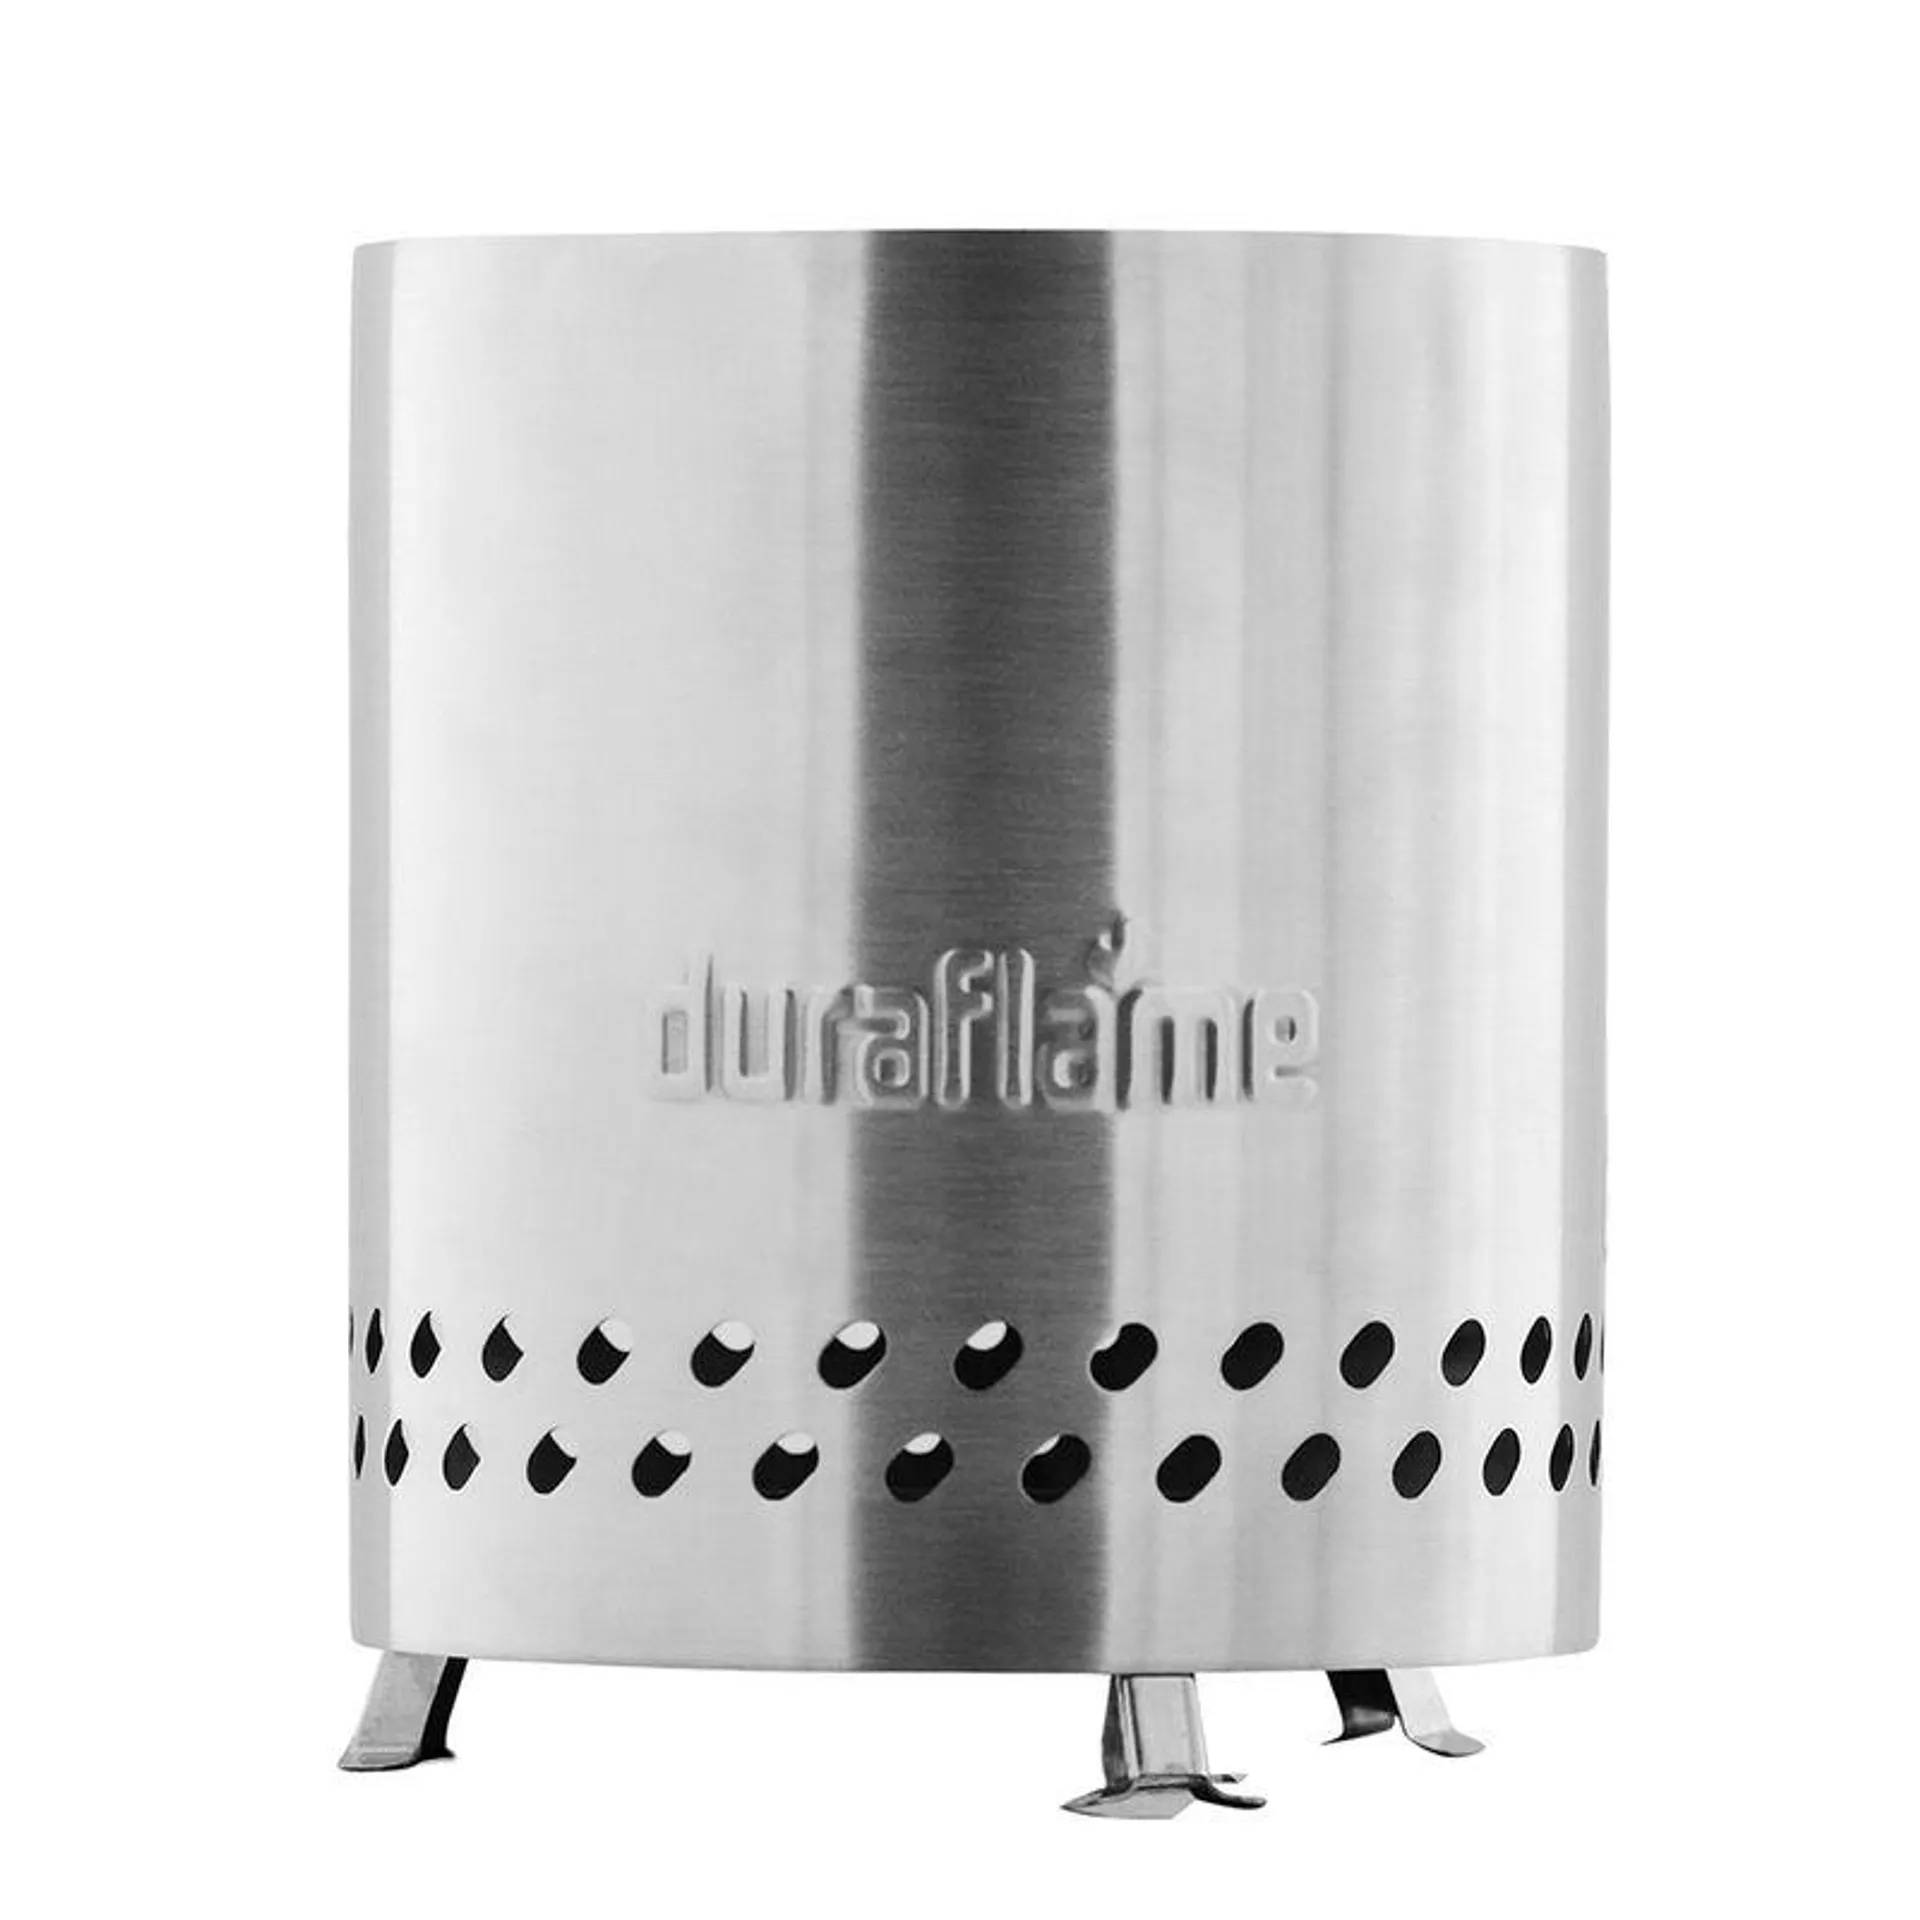 Duraflame 5.5" Stainless Steel Mini Fire Pit